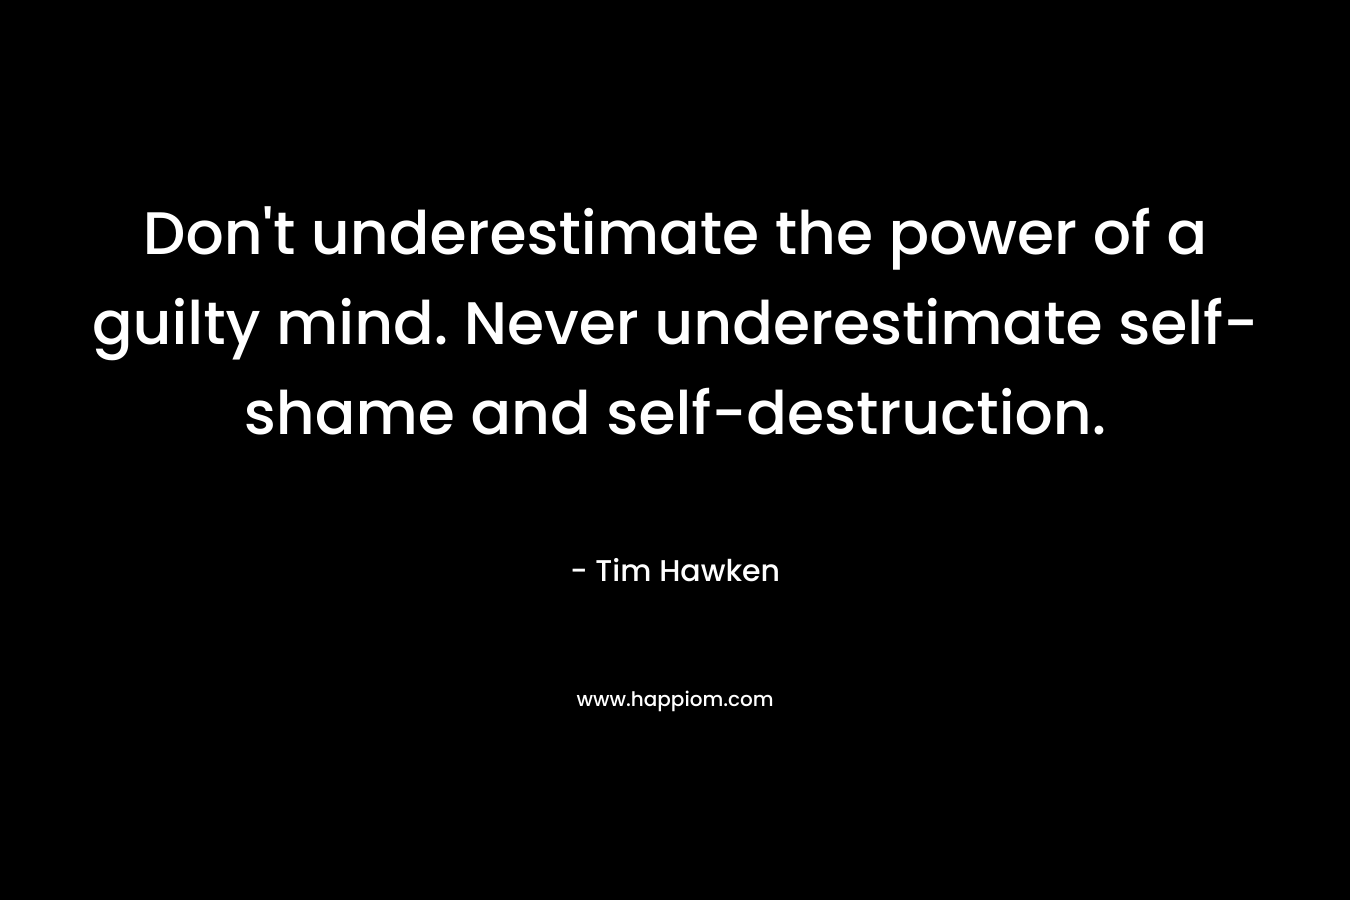 Don’t underestimate the power of a guilty mind. Never underestimate self-shame and self-destruction. – Tim Hawken